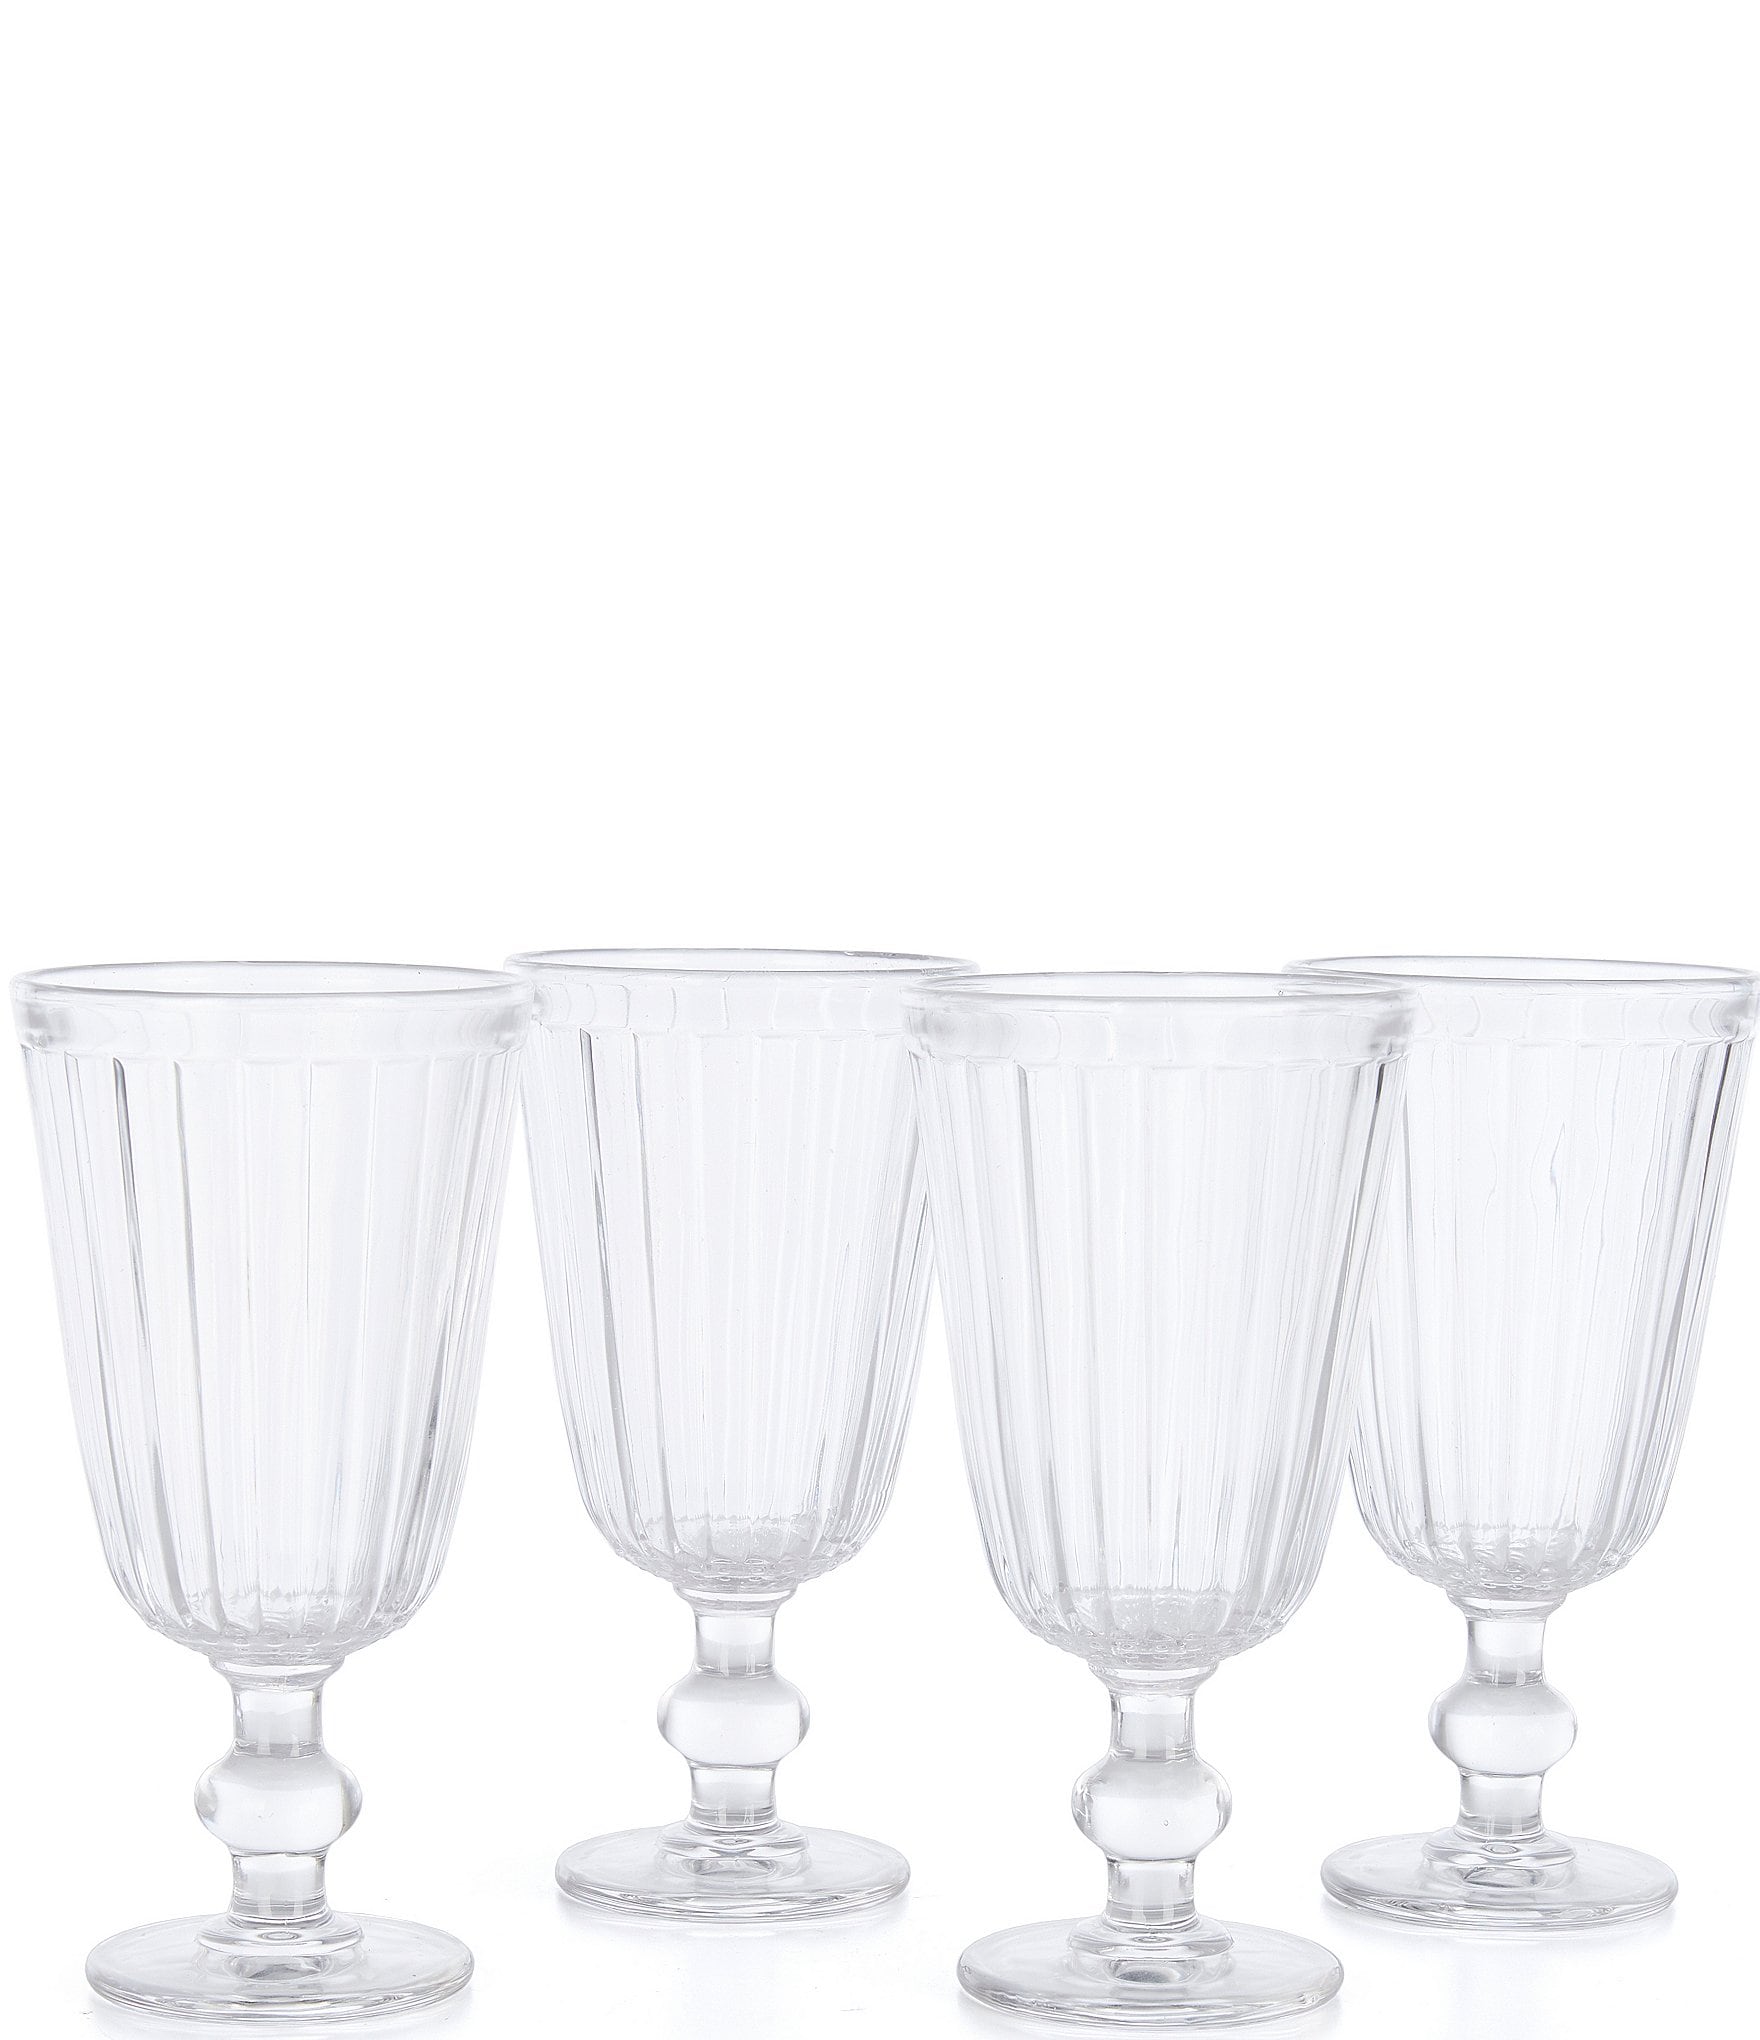 https://dimg.dillards.com/is/image/DillardsZoom/zoom/southern-living-holiday-ribbed-clear-goblets-set-of-4/00000000_zi_c94938a1-b6e2-4edf-80f9-942890bbf25a.jpg